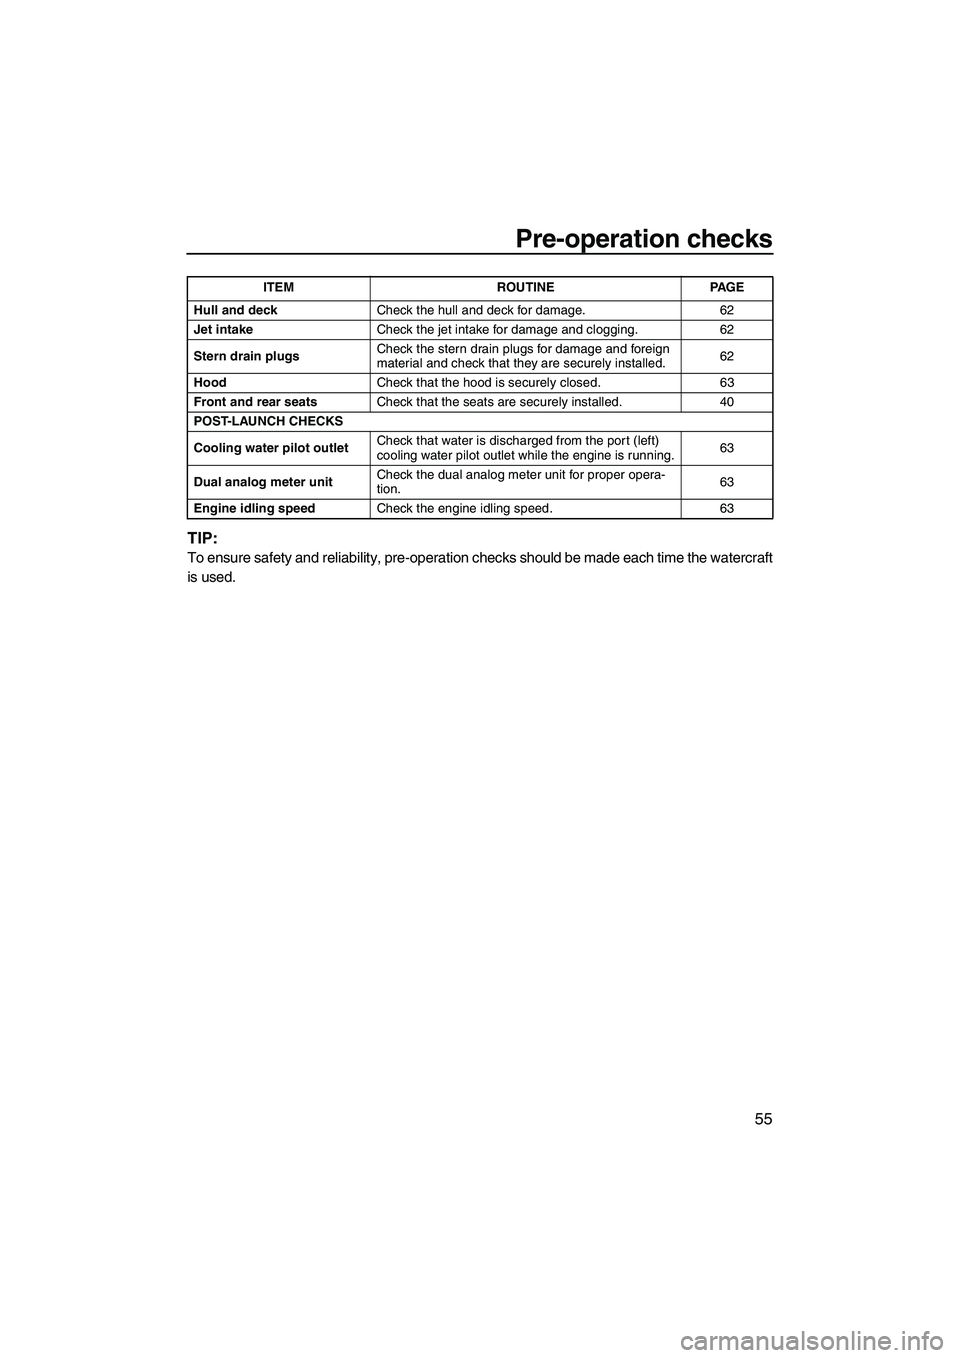 YAMAHA FZR 2012  Owners Manual Pre-operation checks
55
TIP:
To ensure safety and reliability, pre-operation checks should be made each time the watercraft
is used.
Hull and deckCheck the hull and deck for damage. 62
Jet intakeCheck